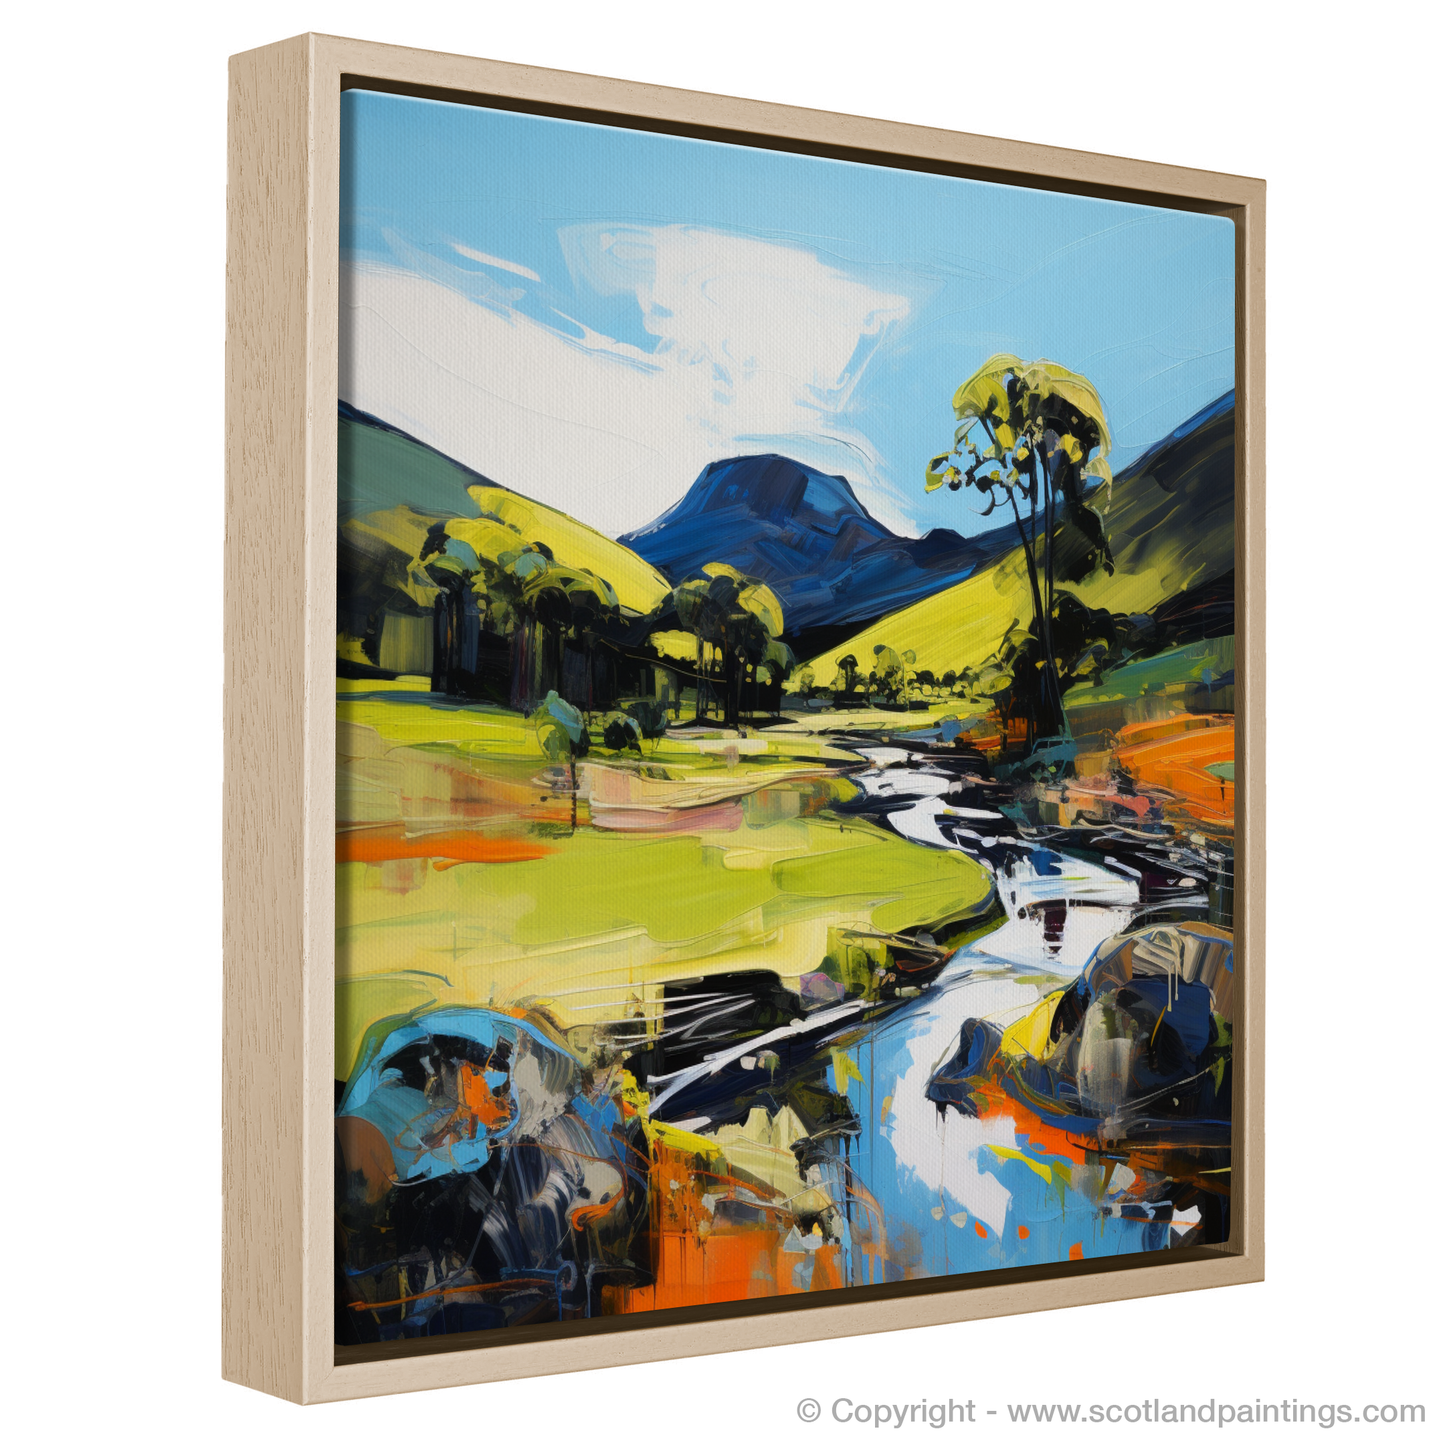 Painting and Art Print of Glen Esk, Angus in summer entitled "Glen Esk in Summer Expression: A Vibrant Ode to Scottish Scenery".